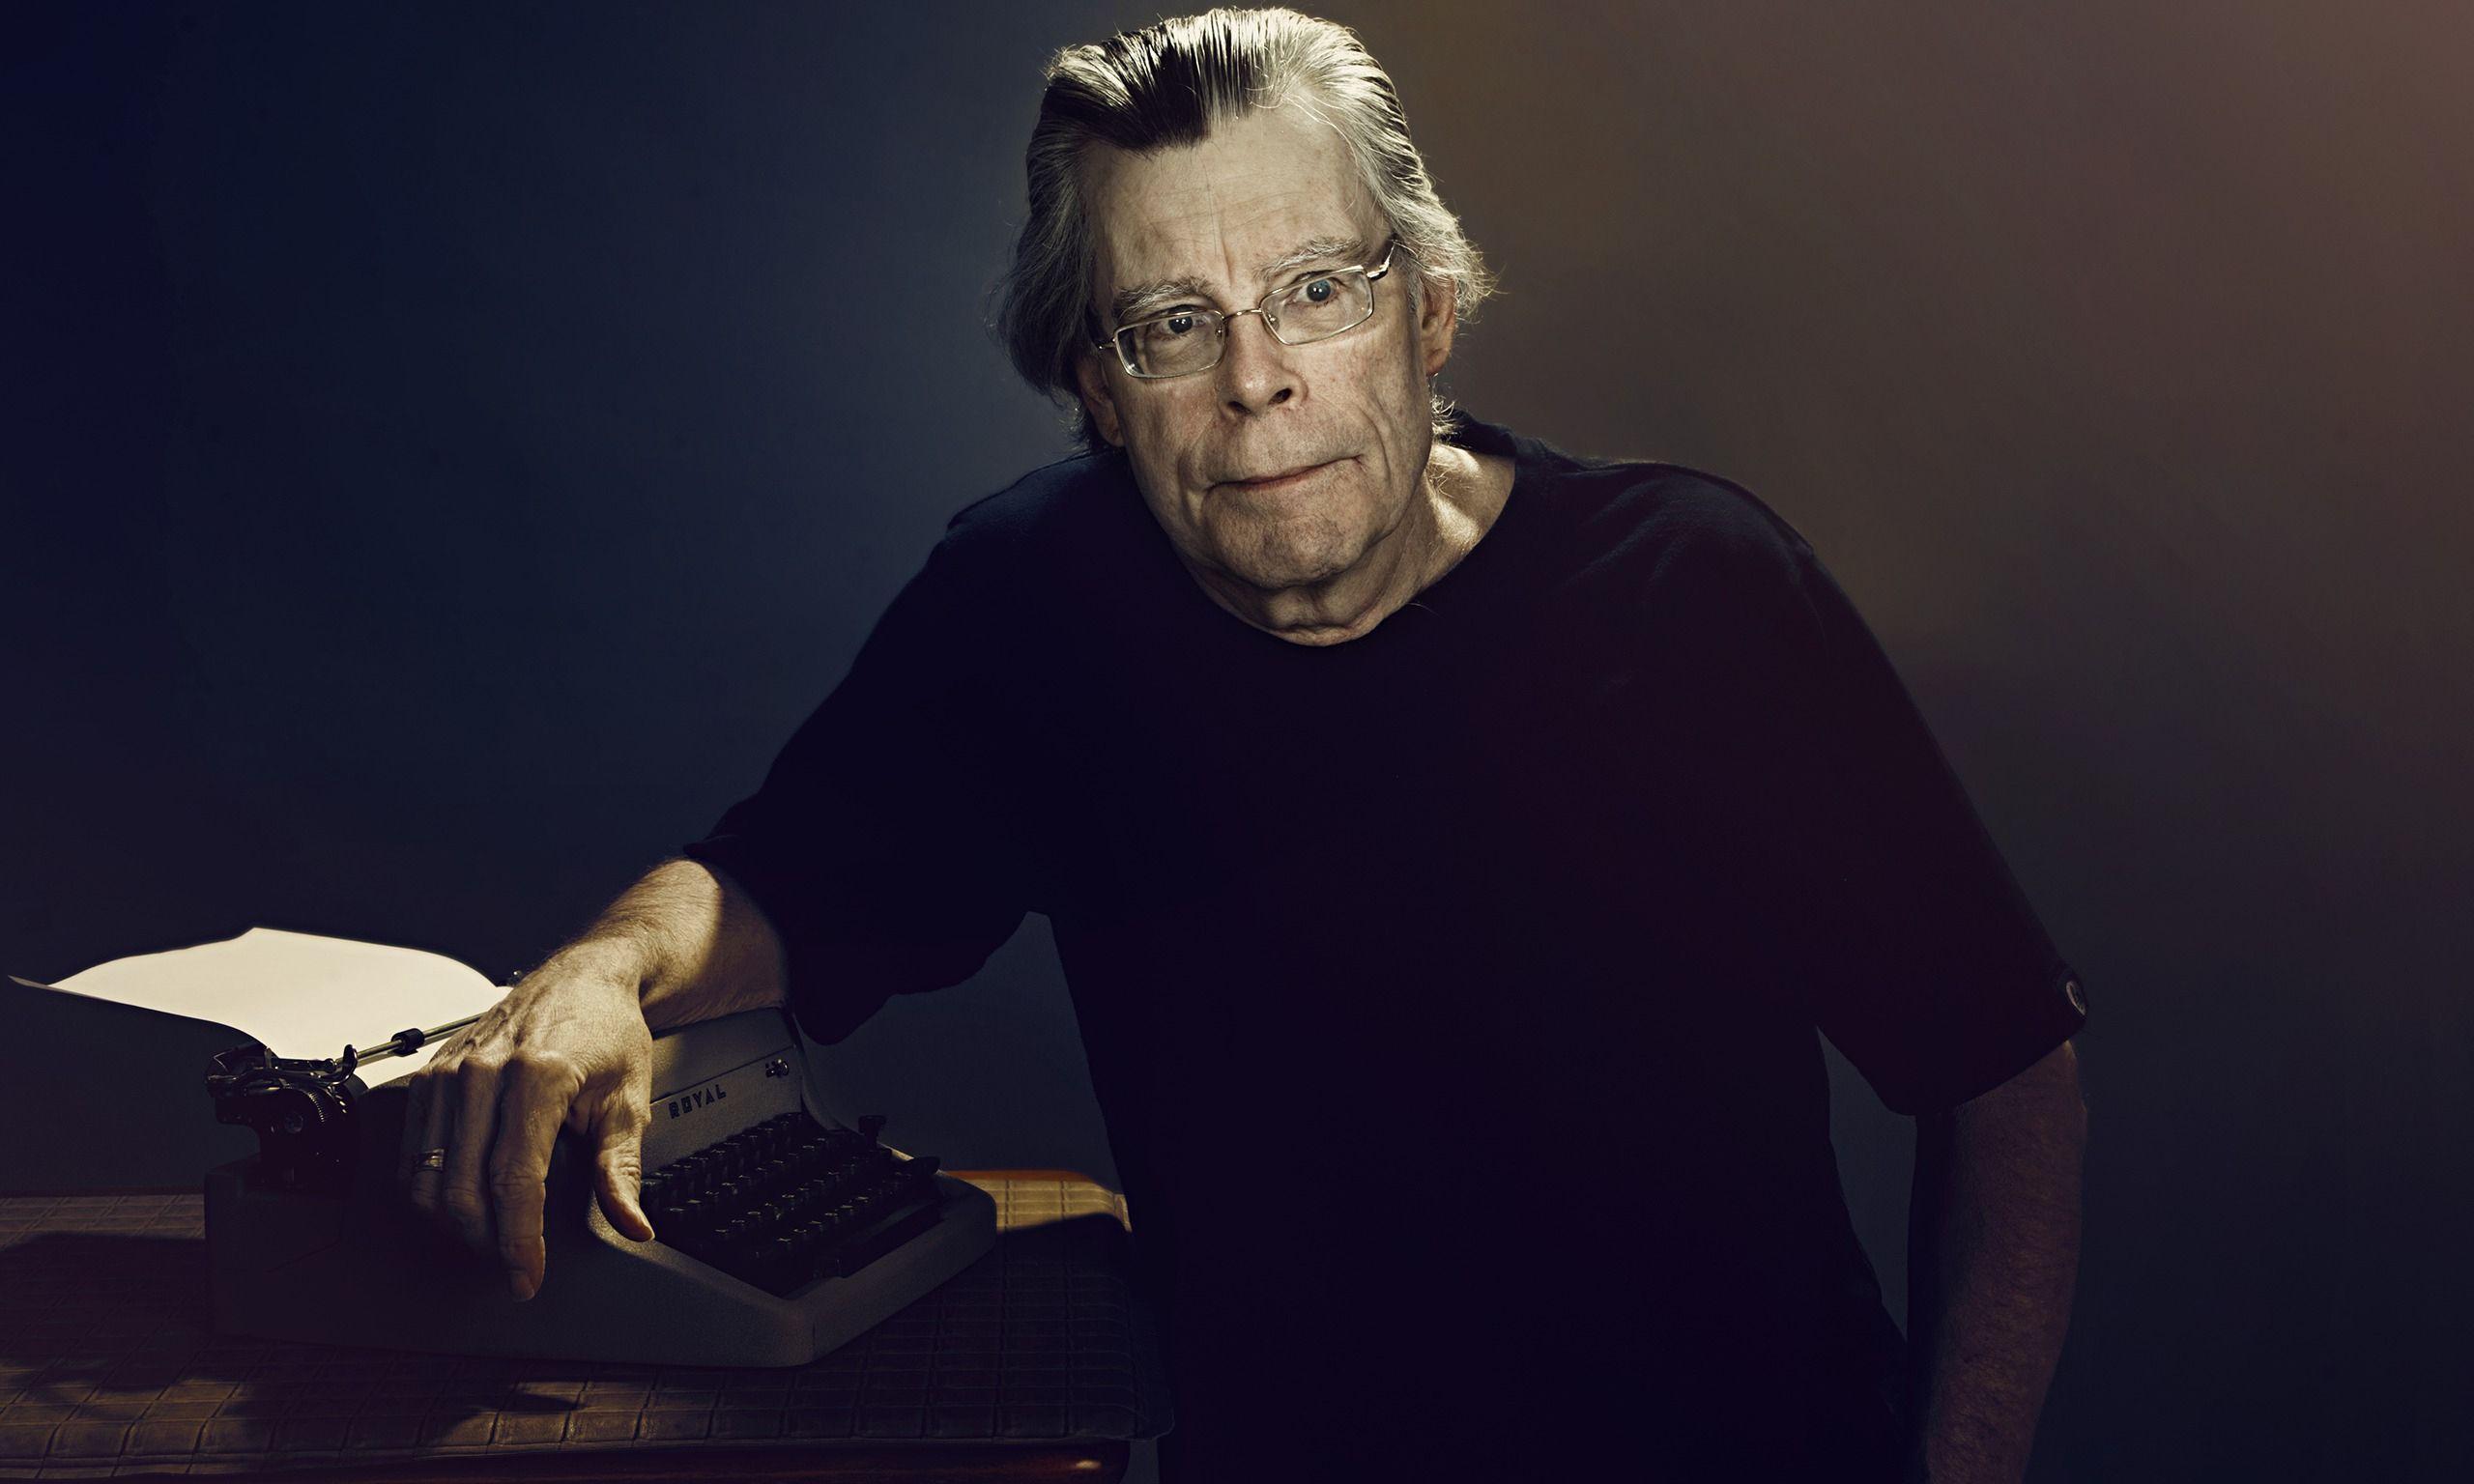 Stephen King Wallpaper Image Photo Picture Background